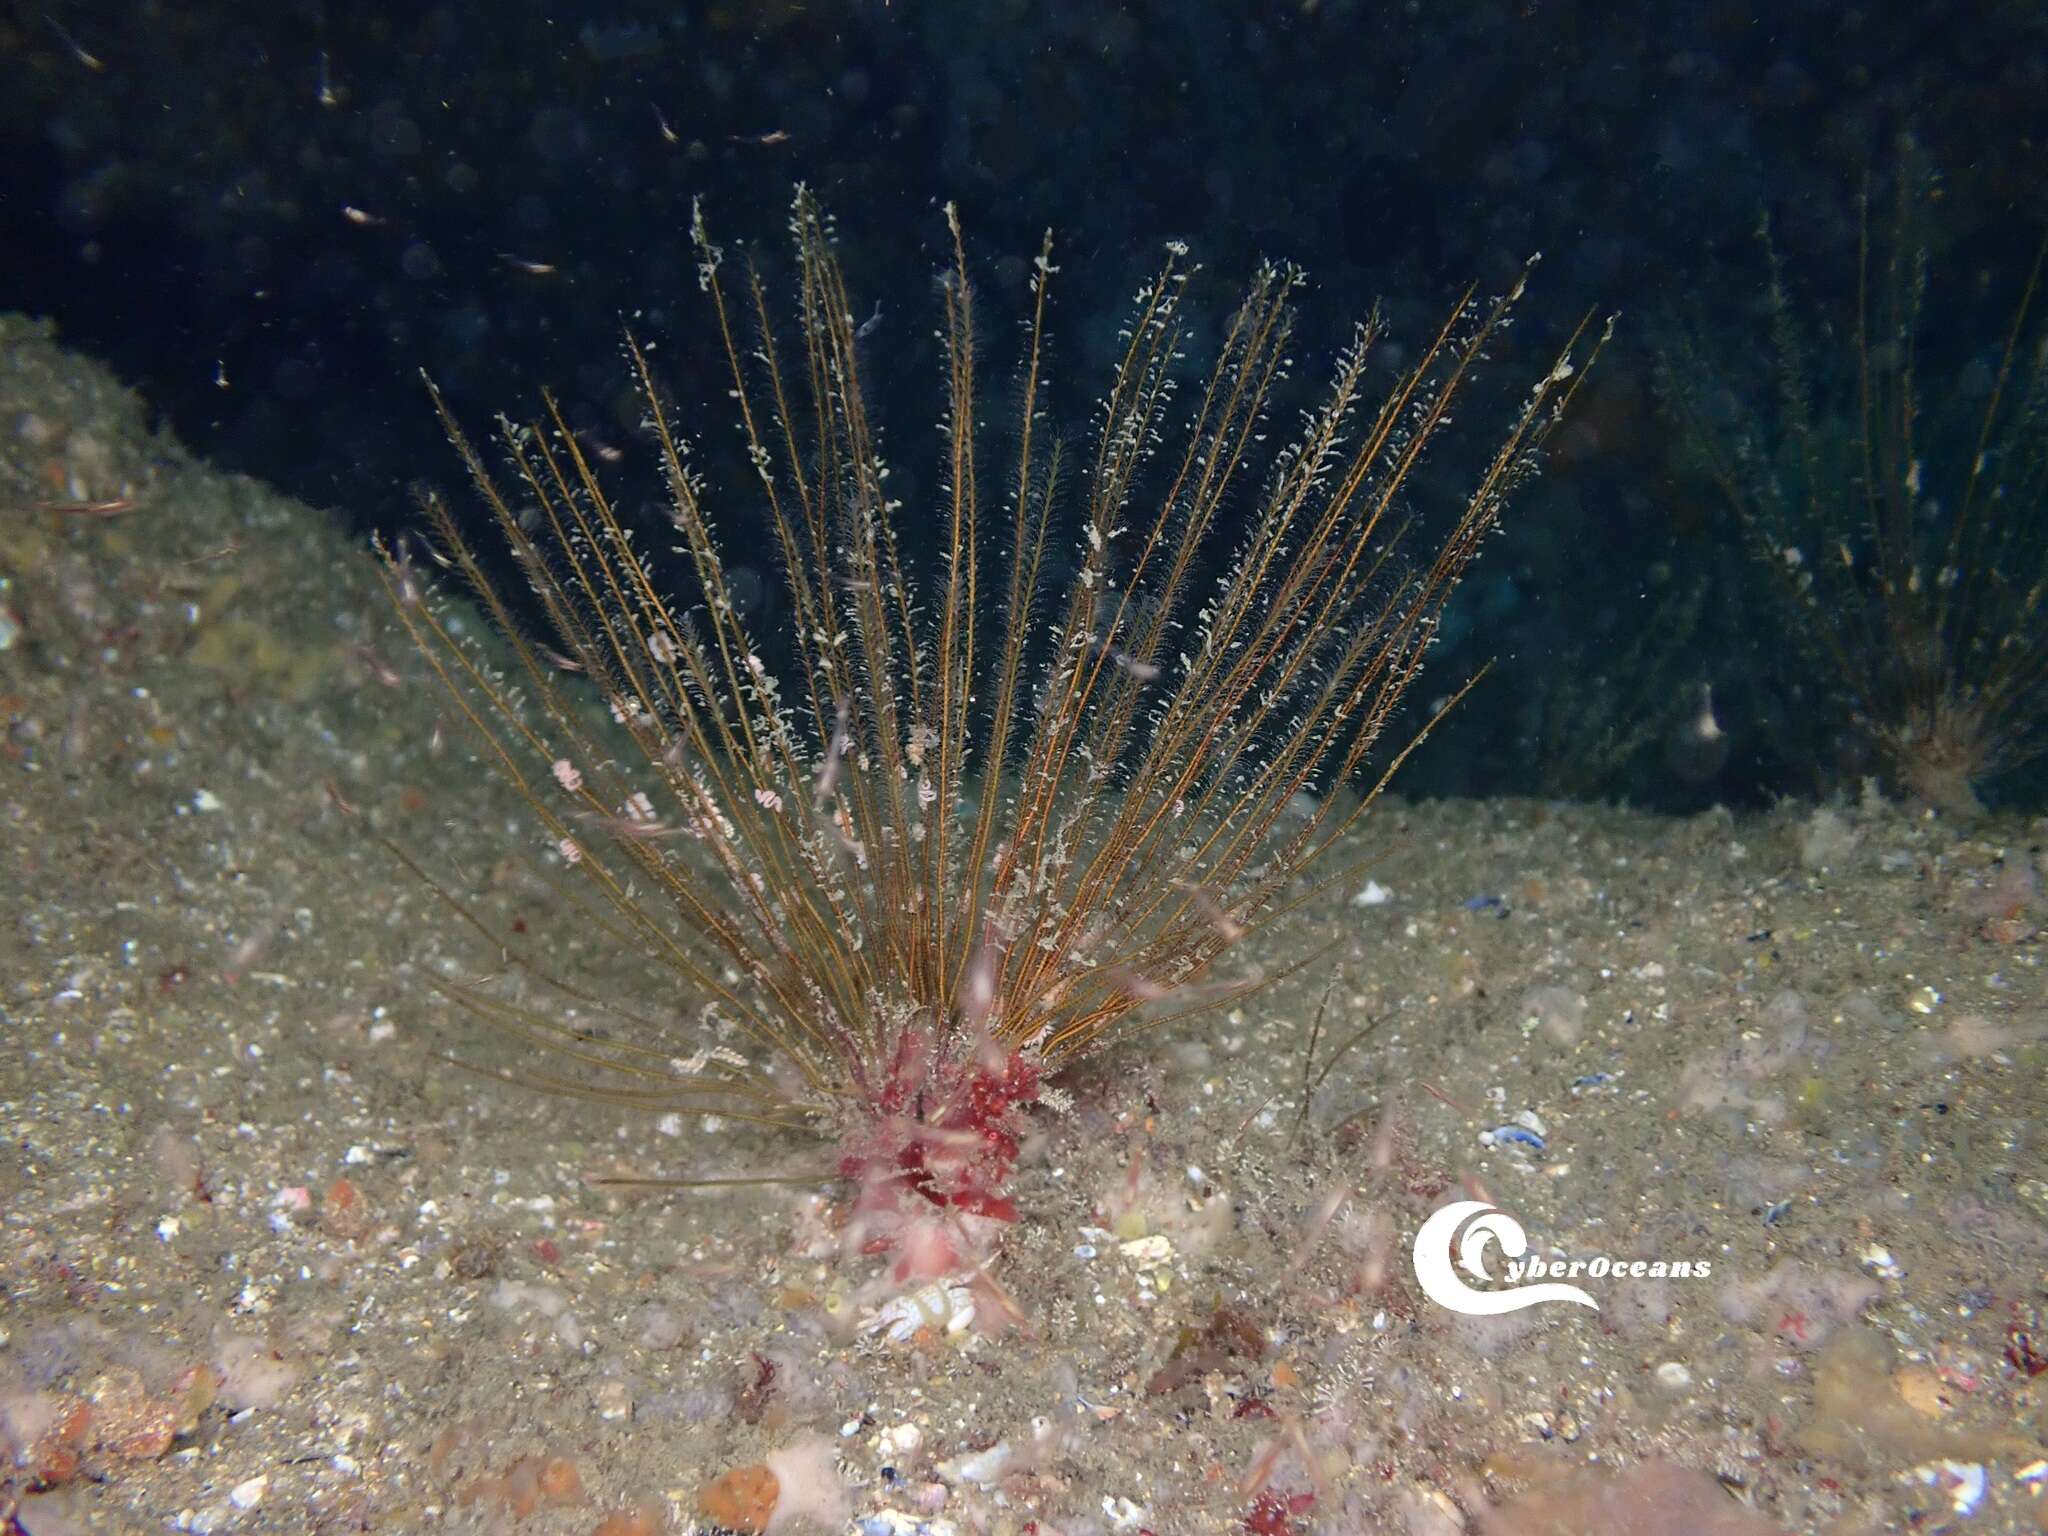 Image of antenna hydroid